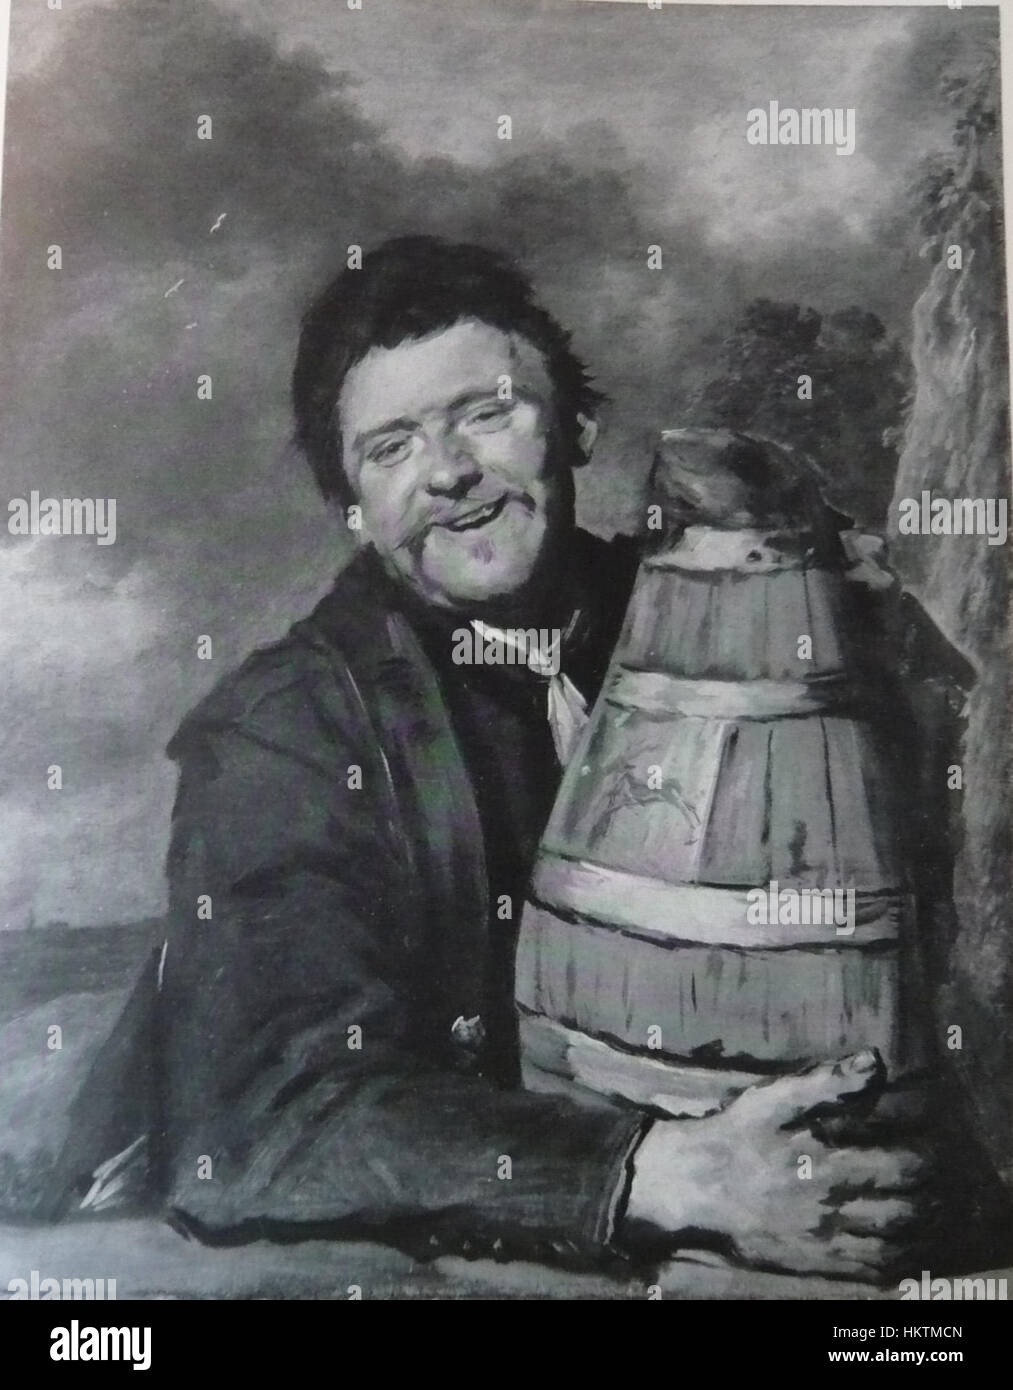 Frans Hals - portrait of a man holding a beer jug Stock Photo